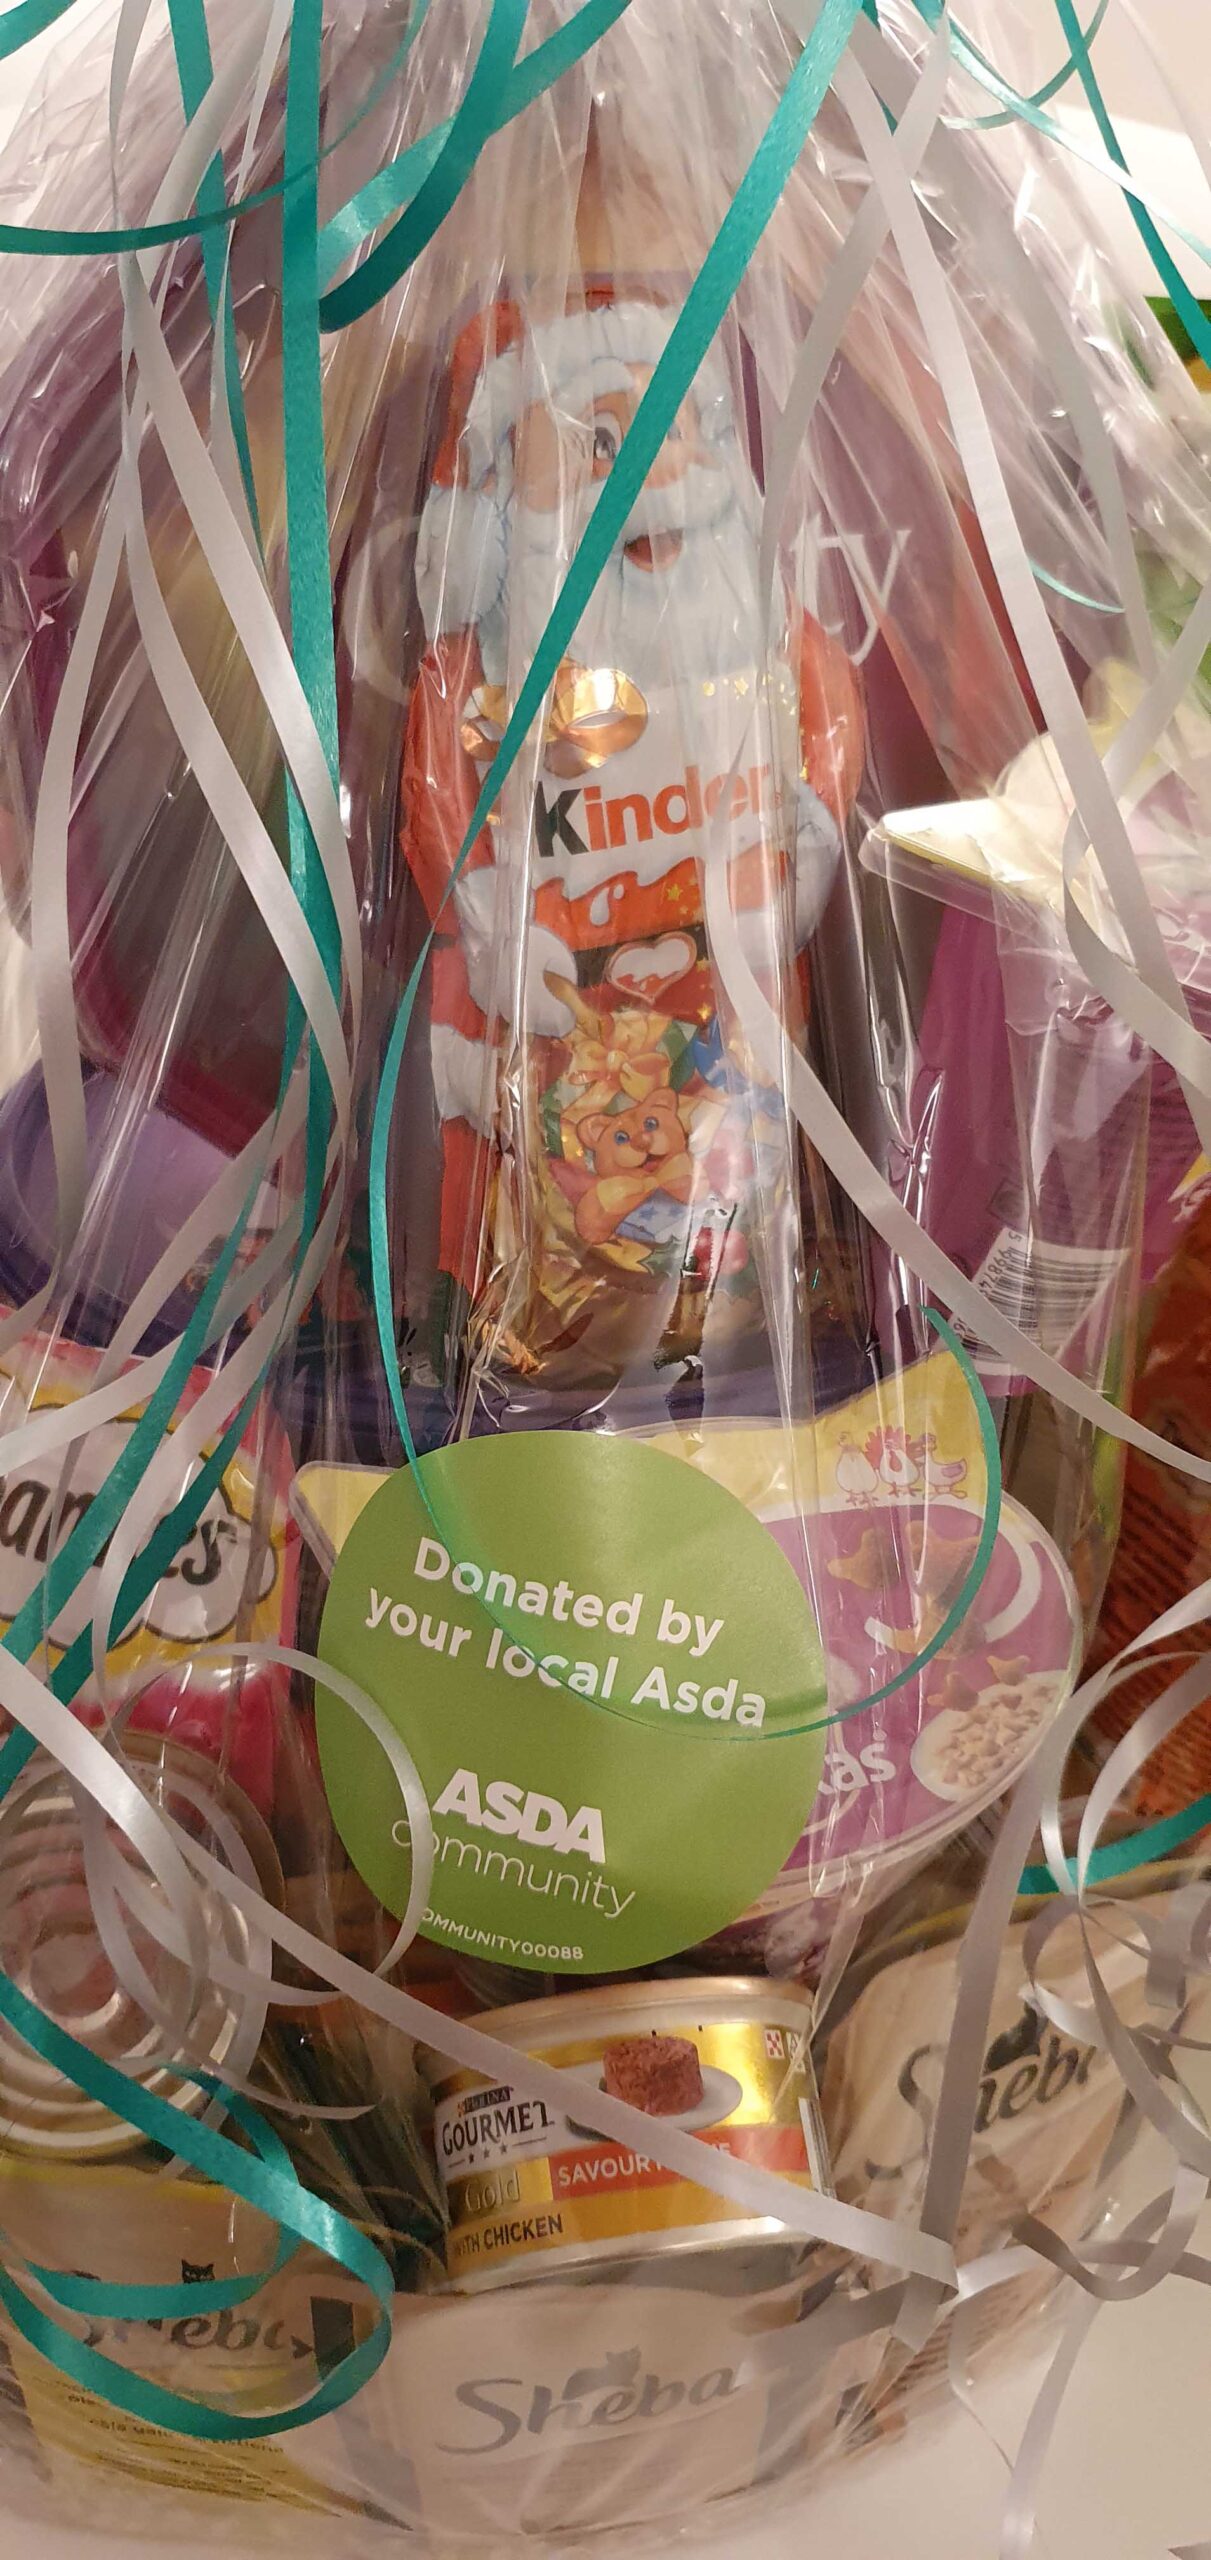 Donated by Asda to Cat Call Charity Hastings